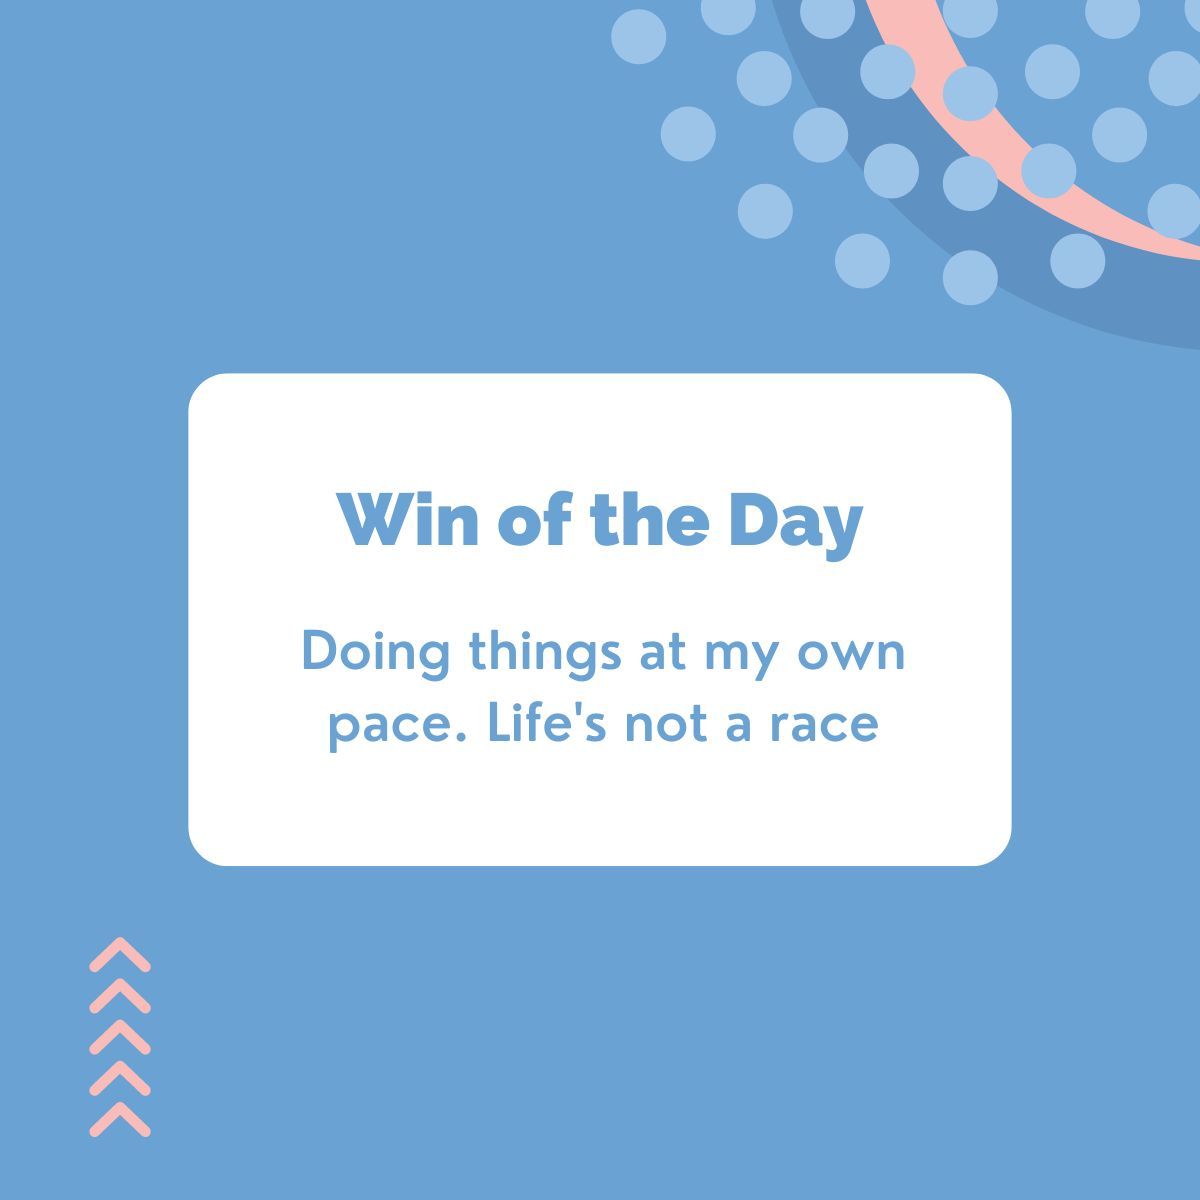 Not in a race

#winoftheday #dailyreflection #dailygratitude #persistence #patience